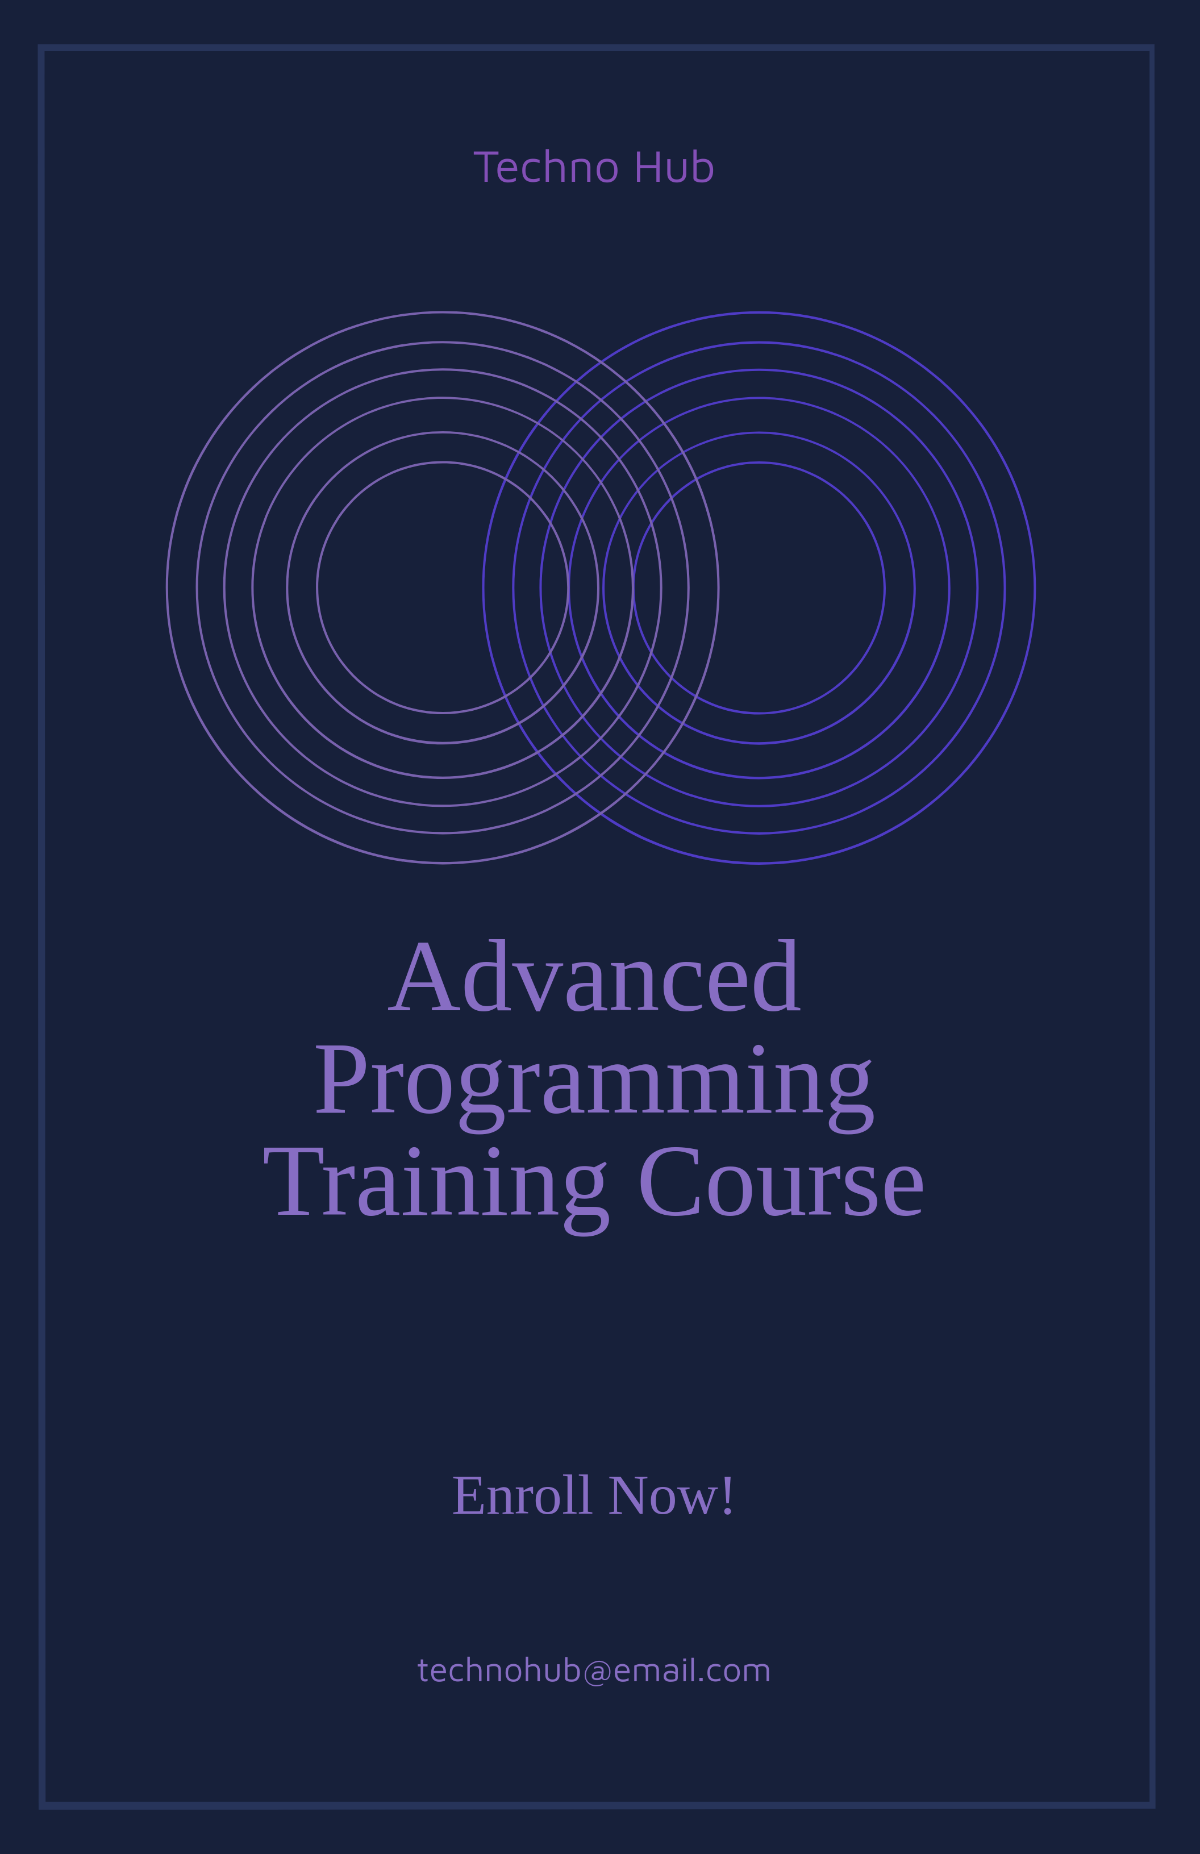 Training Course Poster